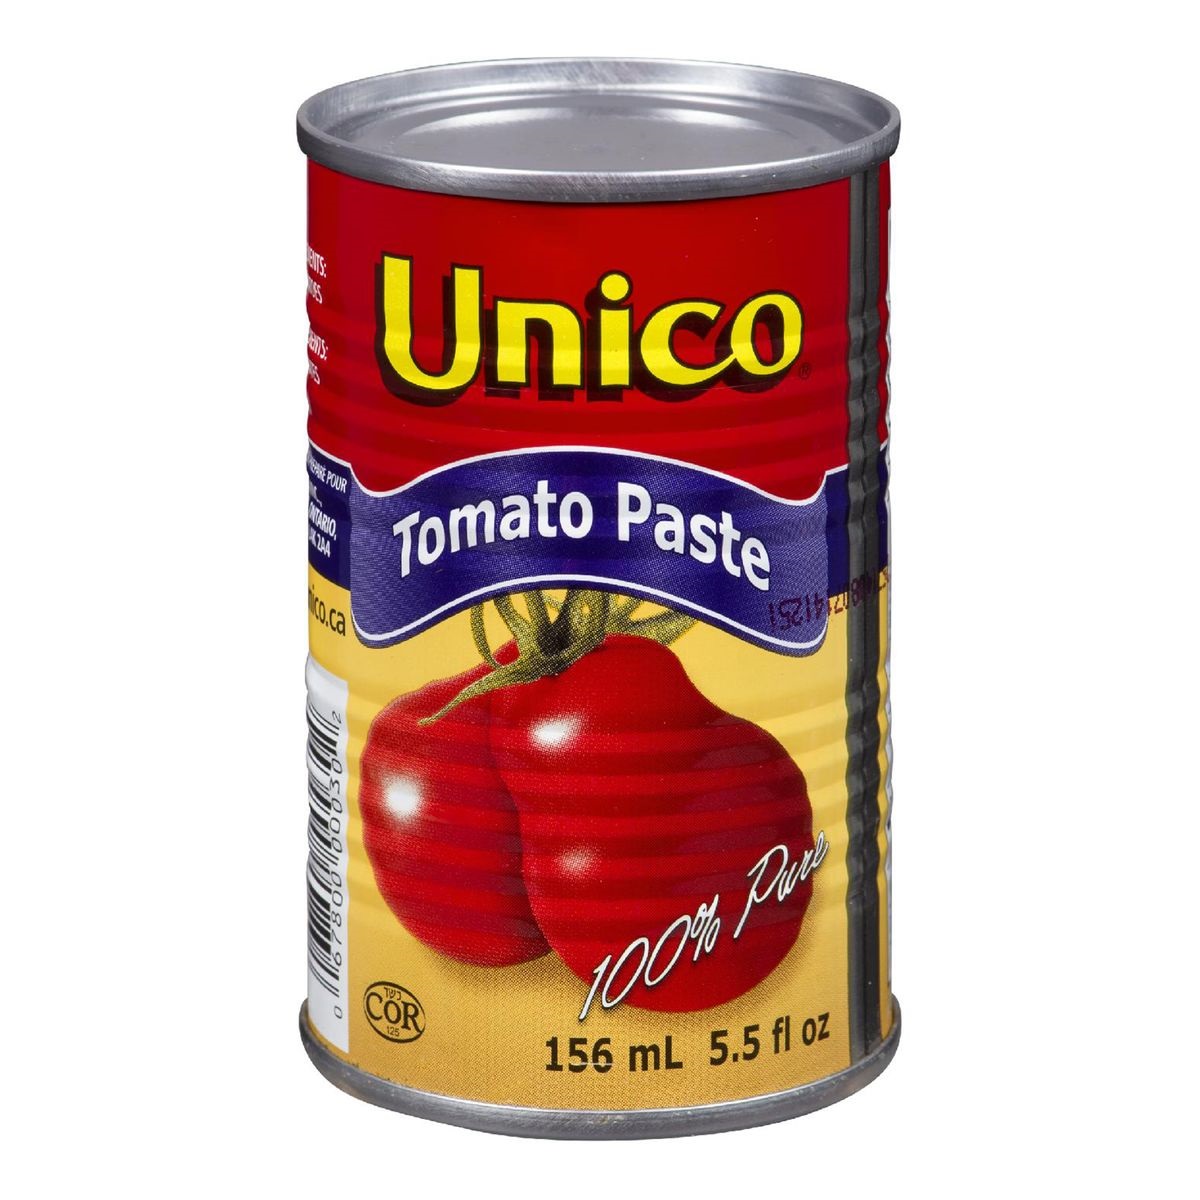 Canned Tomato Paste Available in 369mL 156mL